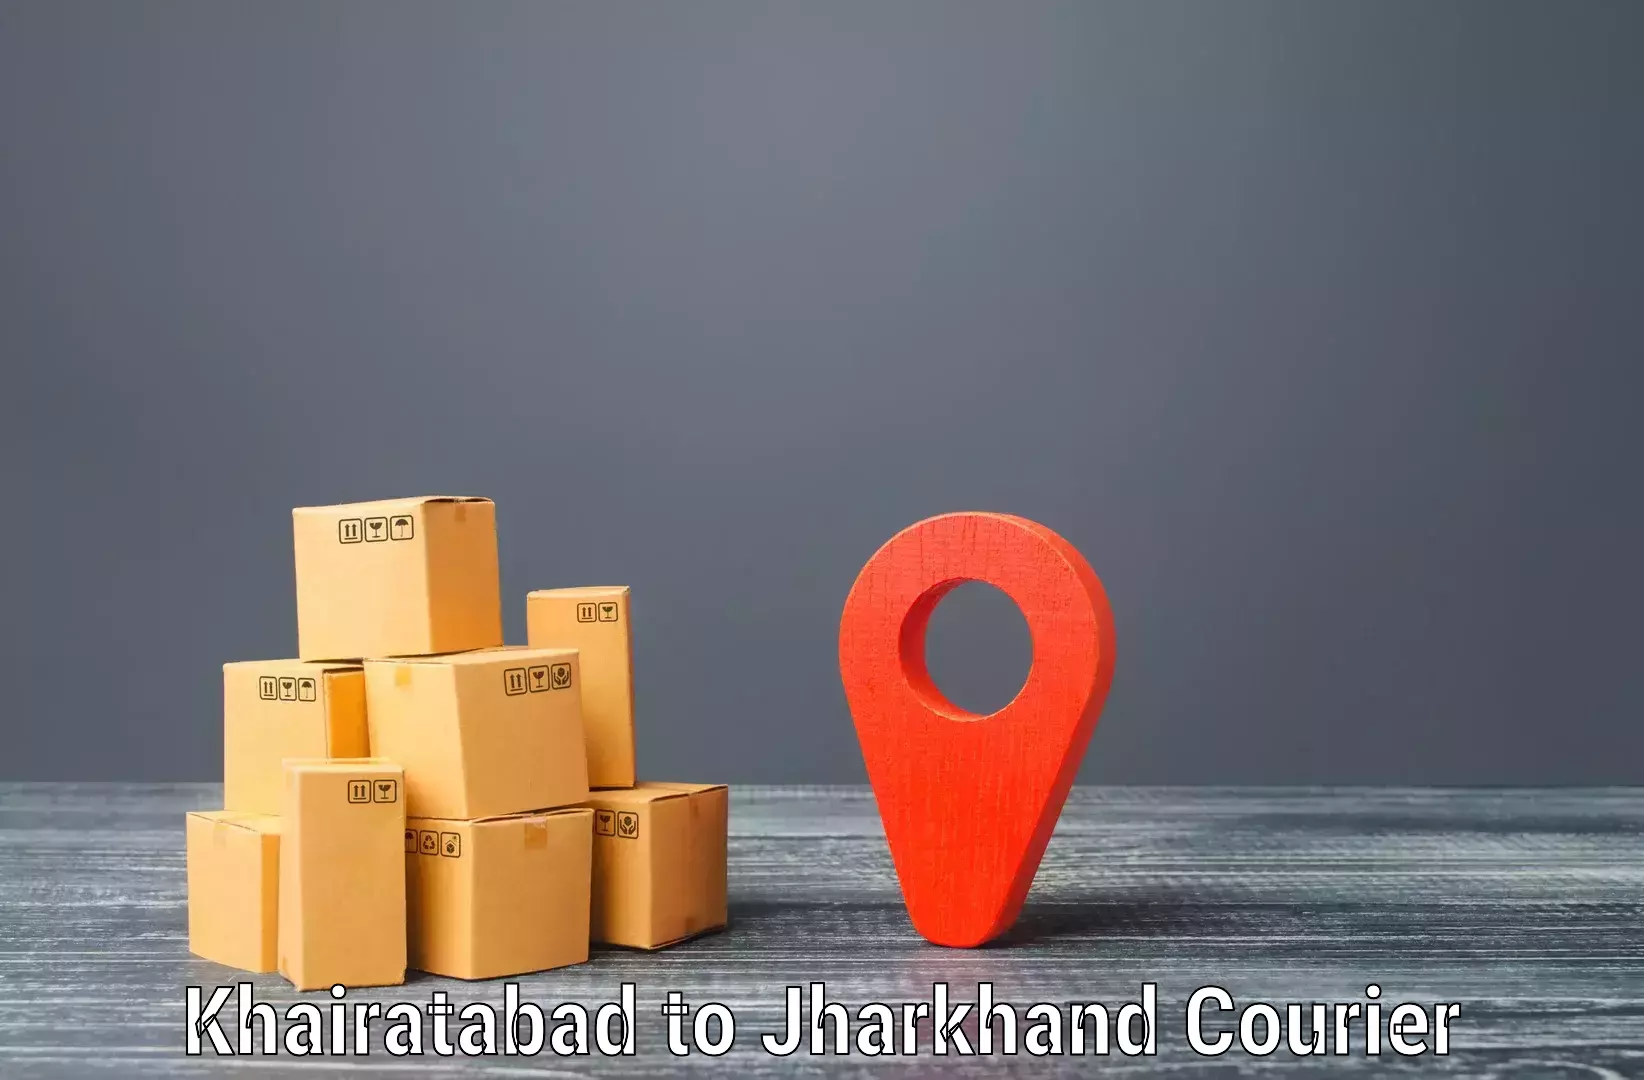 Quality courier services in Khairatabad to Khalari Ranchi